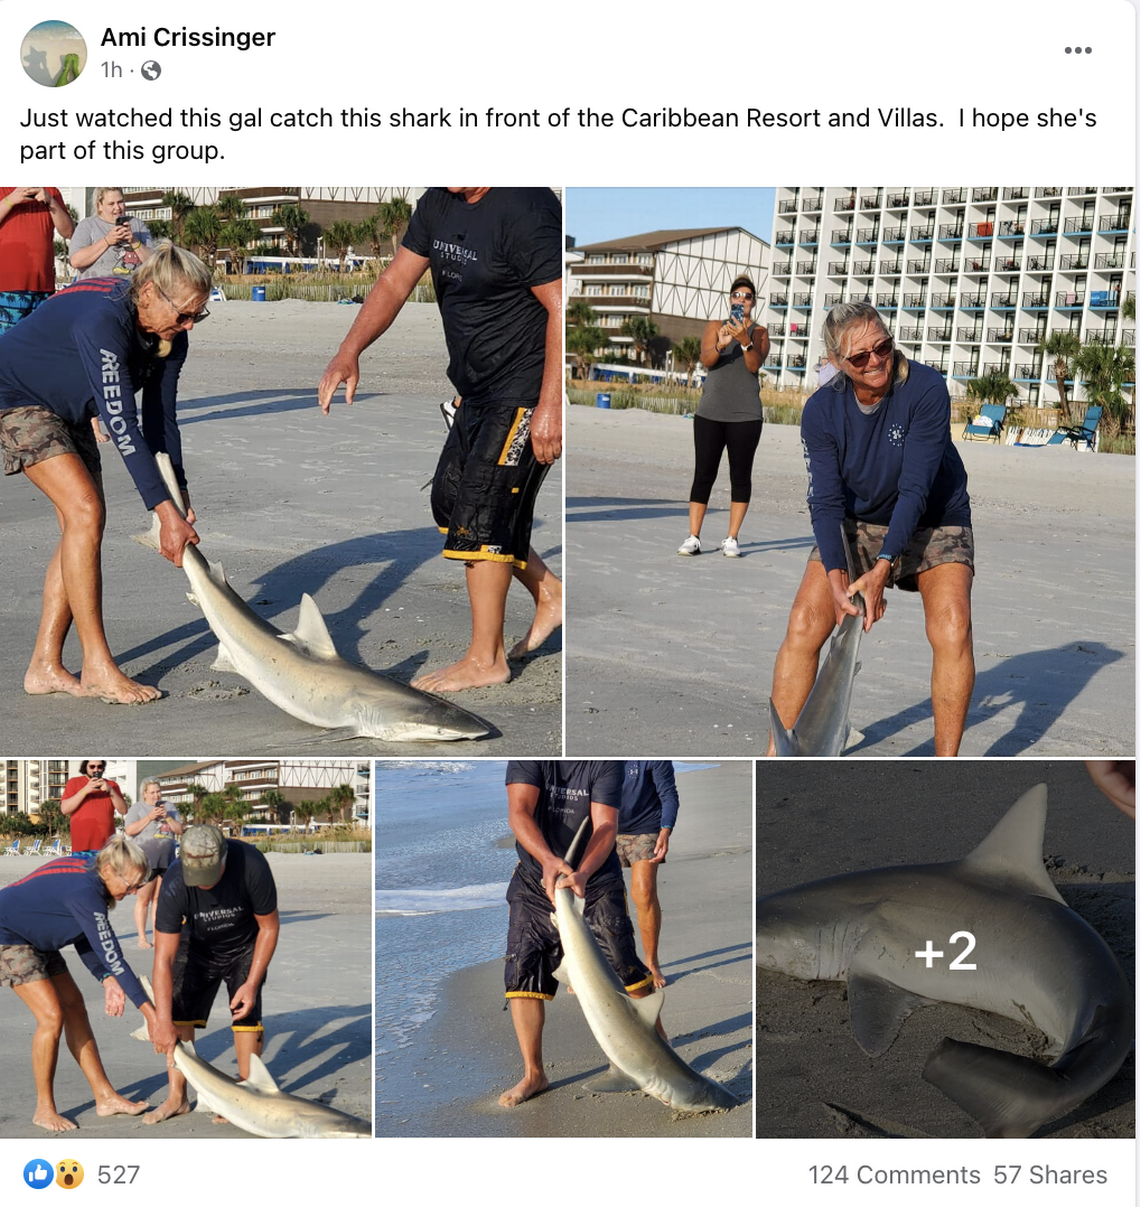 A screenshot of a Facebook post showing a woman who caught a shark in front of the Caribbean Resort and Villas in Myrtle Beach. September 15, 2022. Facebook